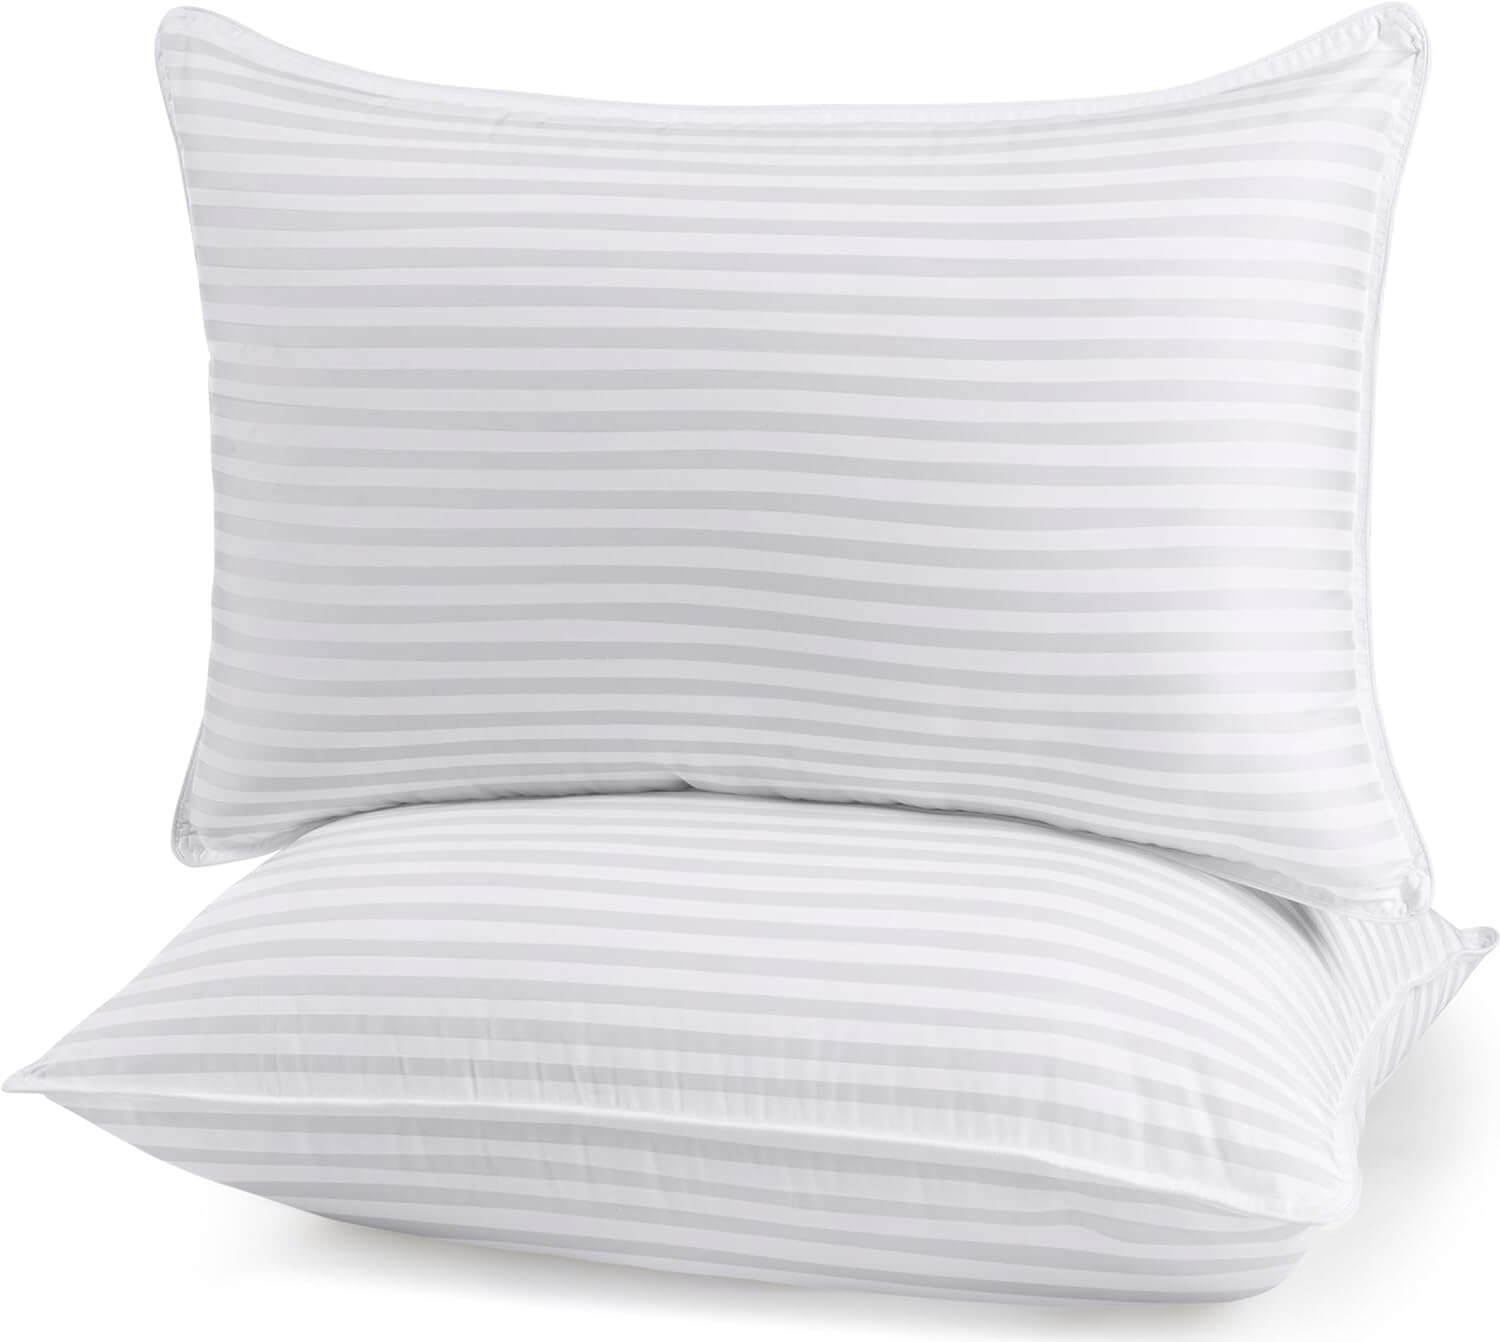 Utopia Bedding Bed Pillows For Side Sleepers